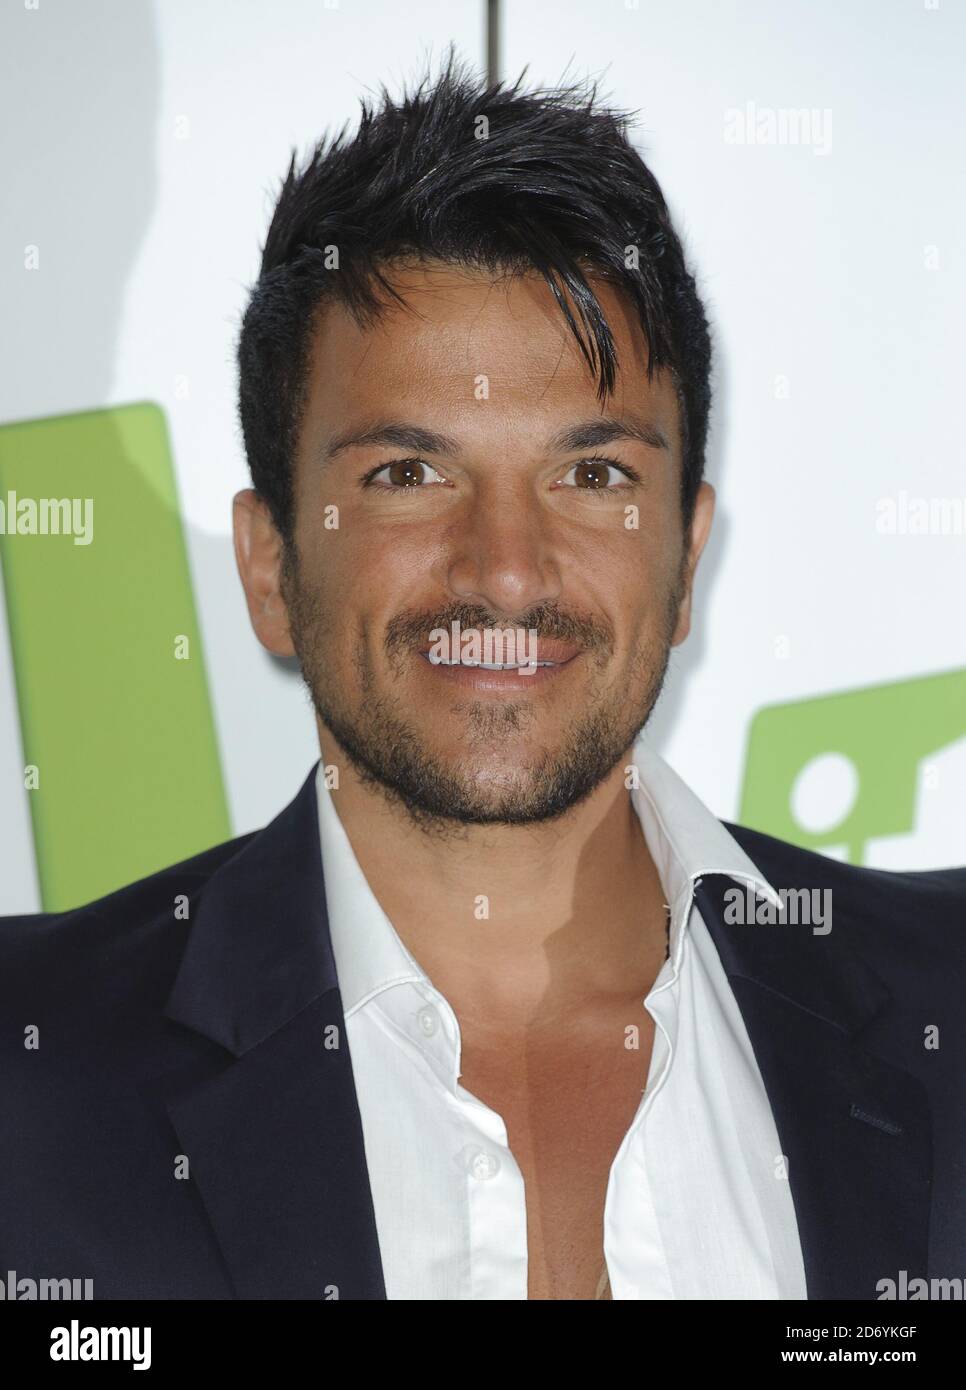 Peter Andre pictured at the launch of his new reality TV show, Peter Andre: The Next Chapter, at the Soho hotel in central London. Stock Photo